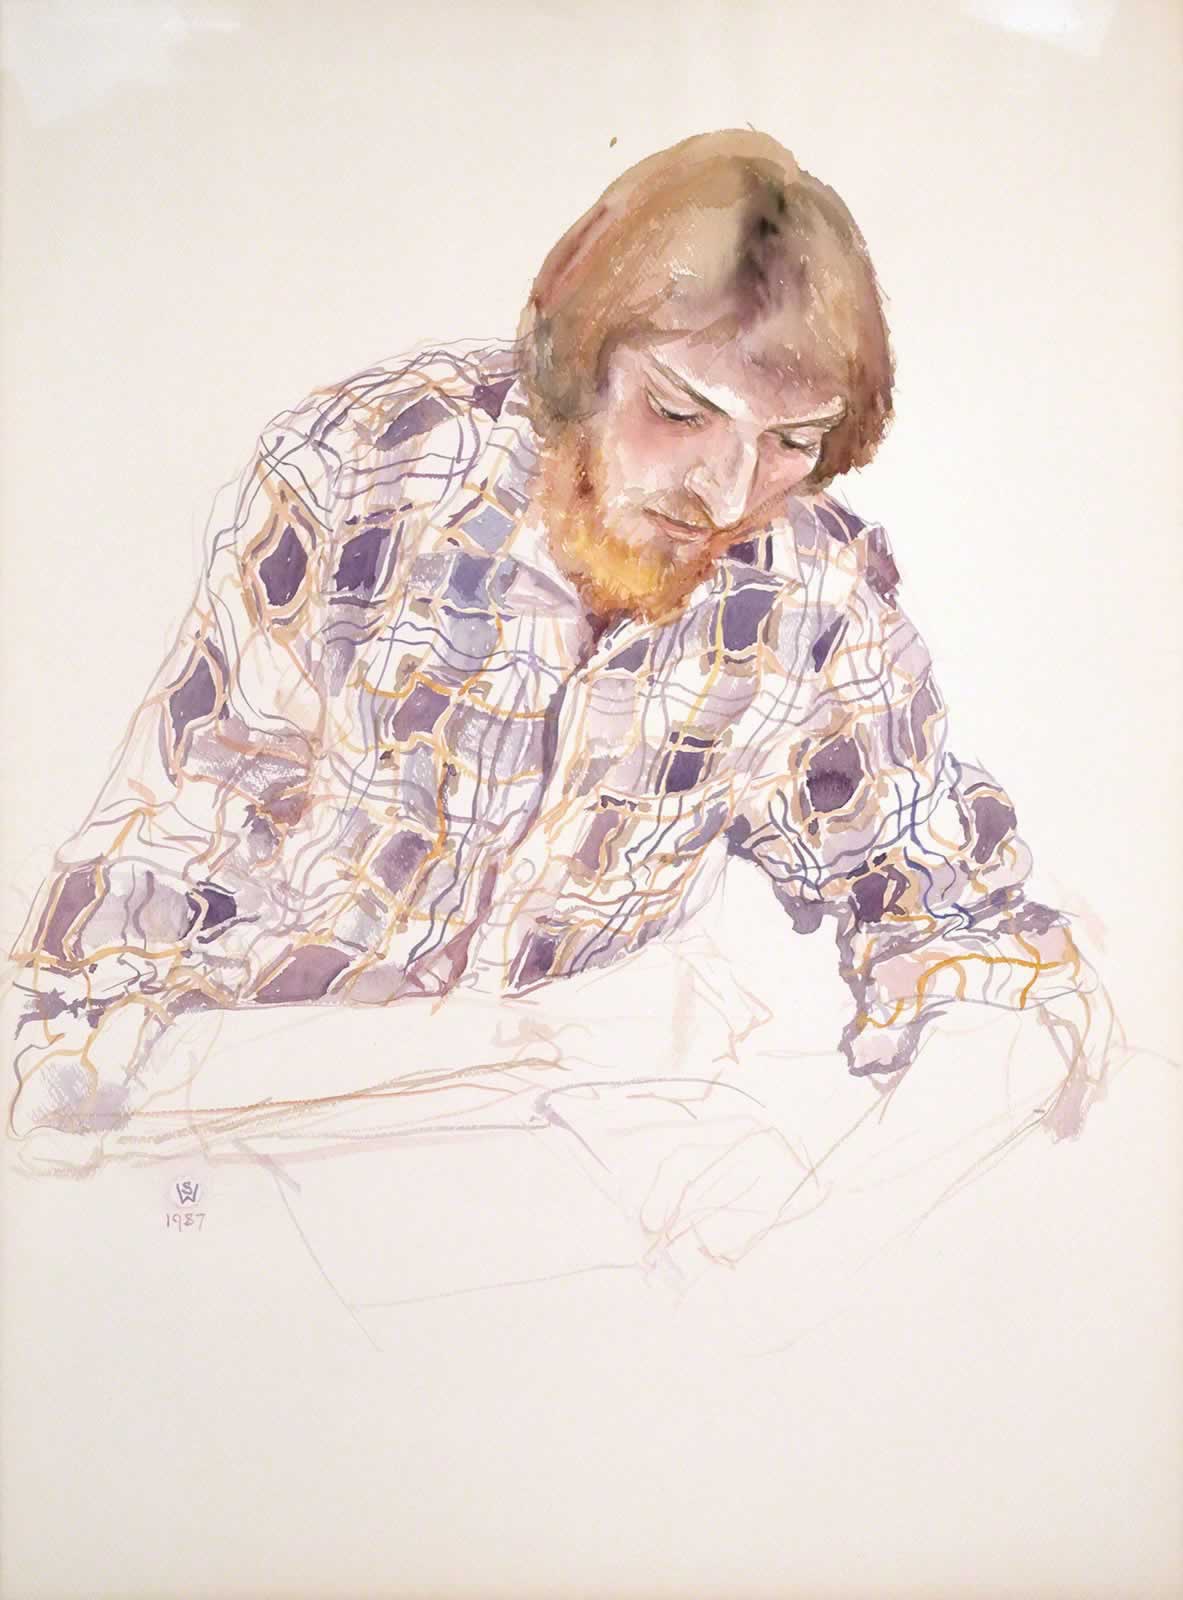 Paul in Check Shirt, Reading by Susan Dorothea White